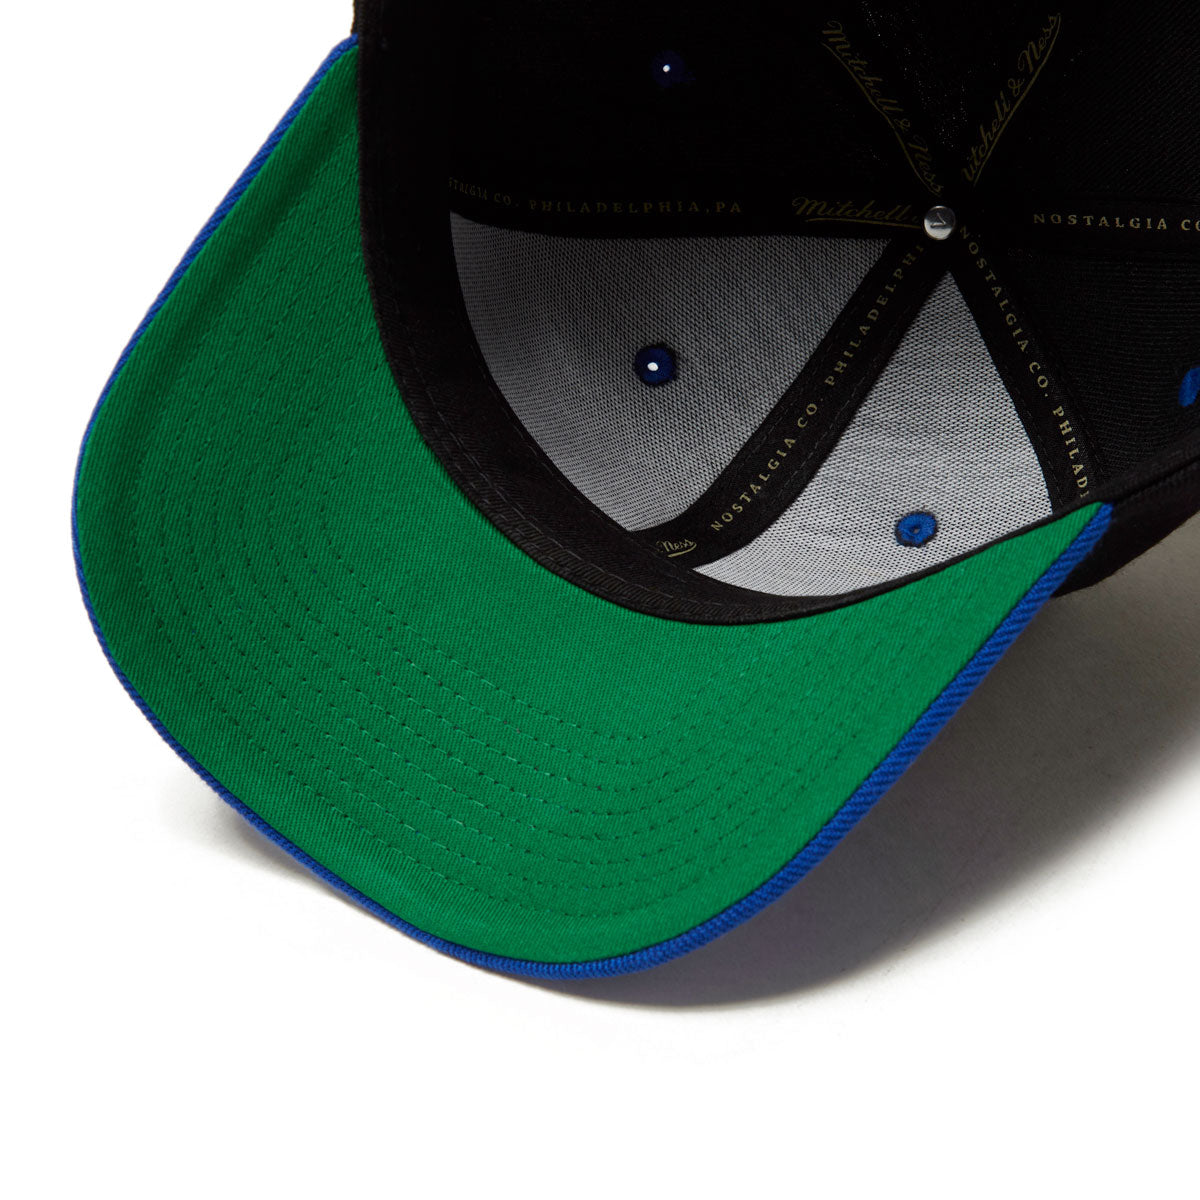 CCS x Mitchell & Ness Hoops Hat - Black/Royal image 3